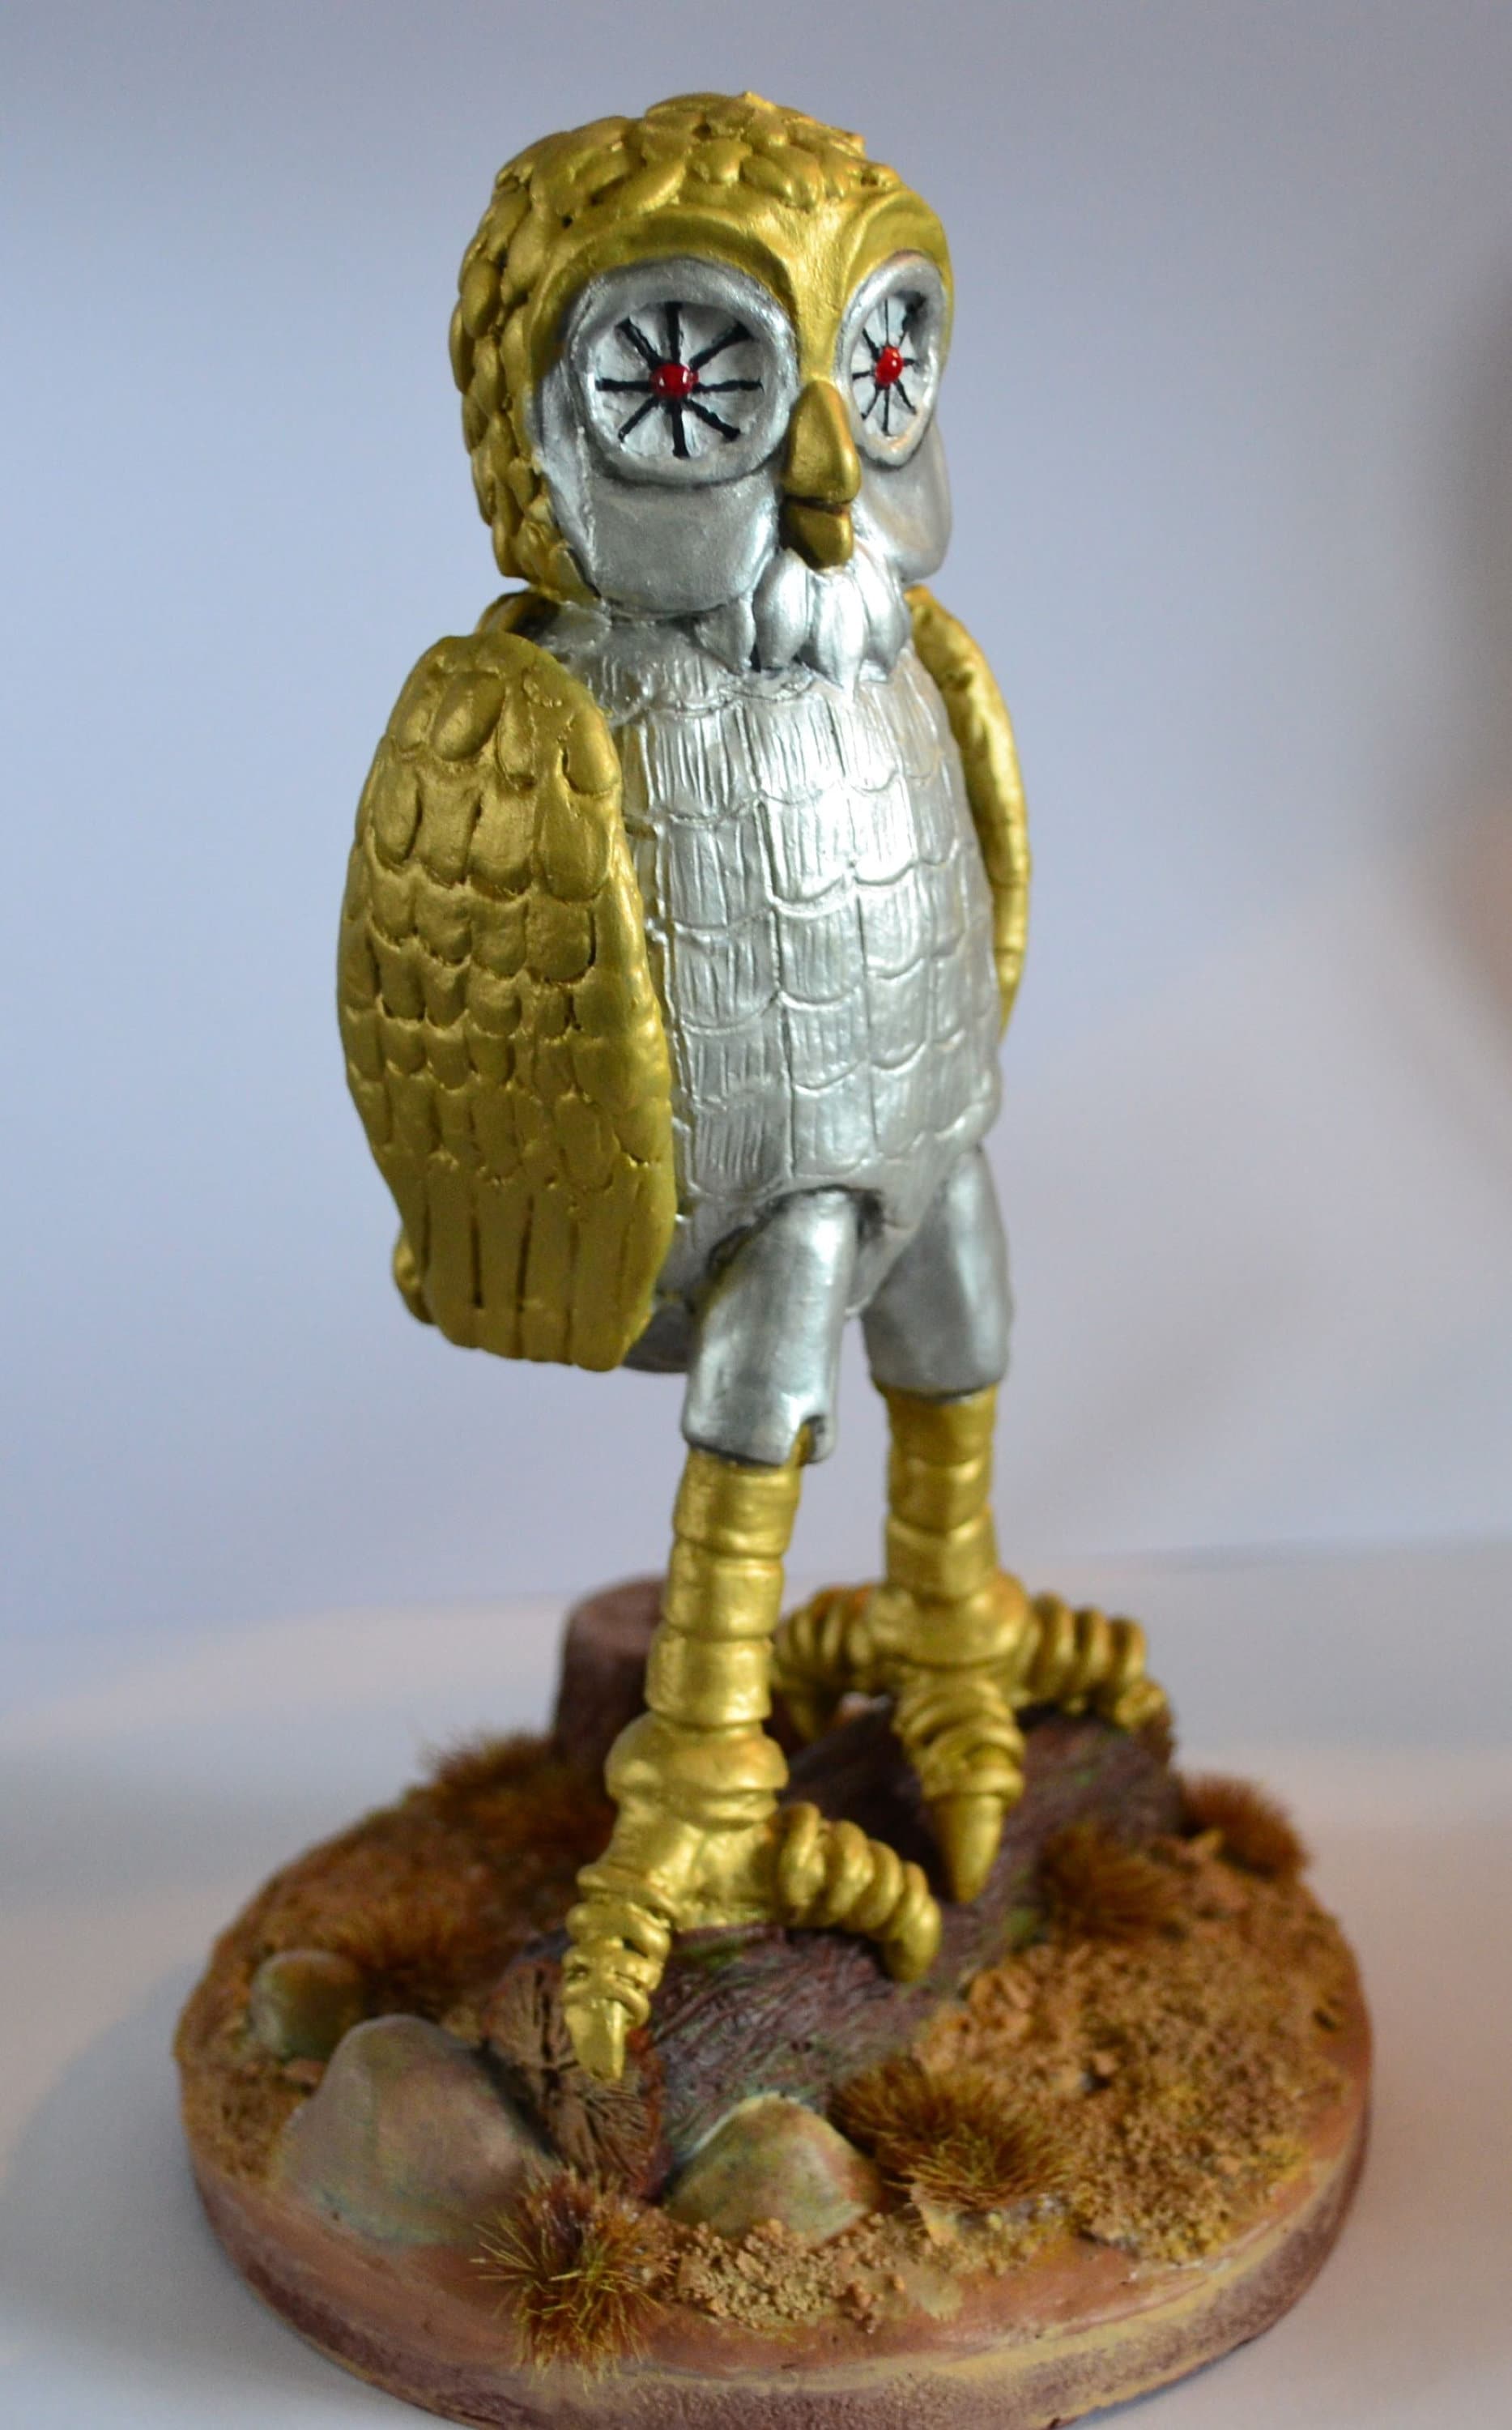 The Mechanical Owl Bubo Clash of the Titans Inspired Resin 